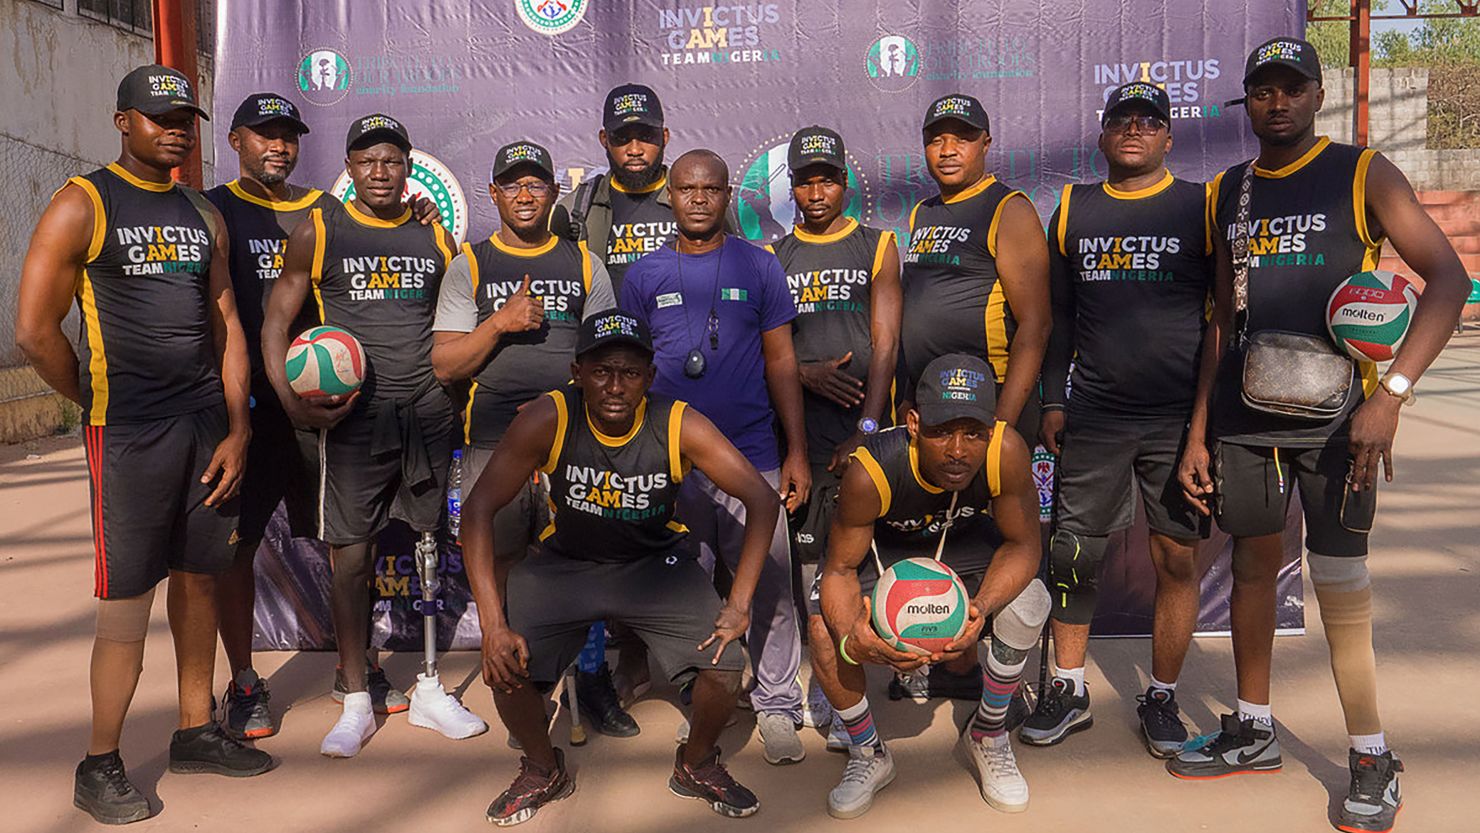 Nigeria gets Africa's first entry at Prince Harry's Invictus Games for wounded veterans | CNN